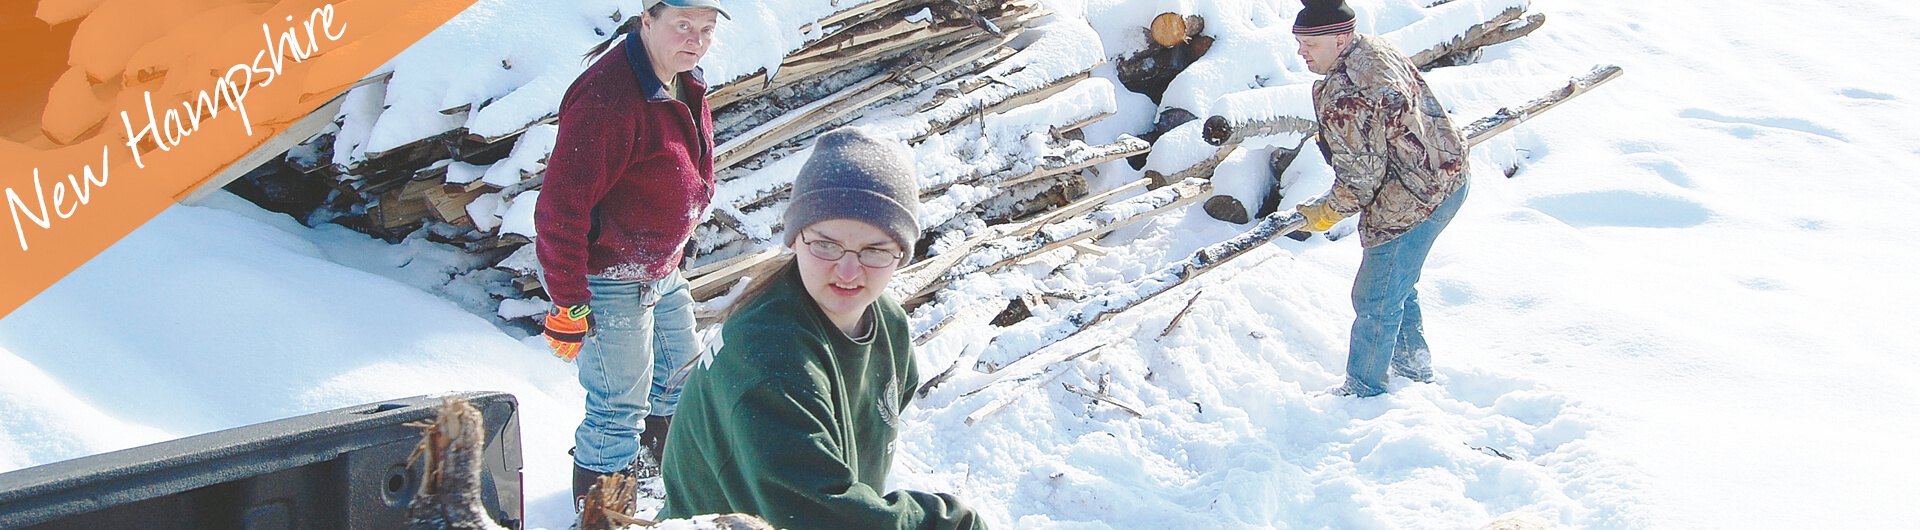 New Hampshire Car Donation Banner | Family Moving Timber in the Snow